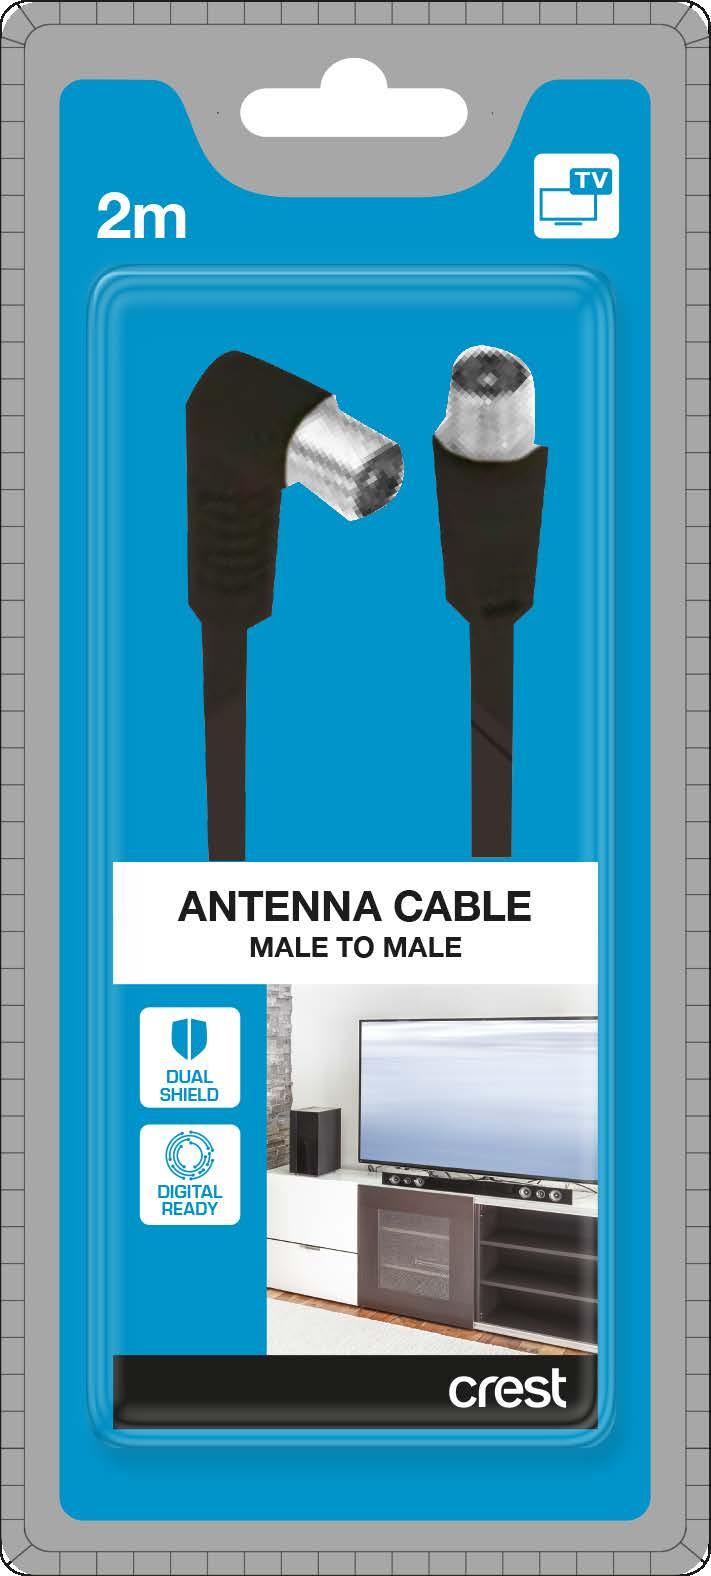 TV Antenna Cable - Dual Shield Male to Male 2m New Product This Crest TV antenna cable with right angle connector is ideal for space saving when connecting it to tight spaces as a wall mounted flat